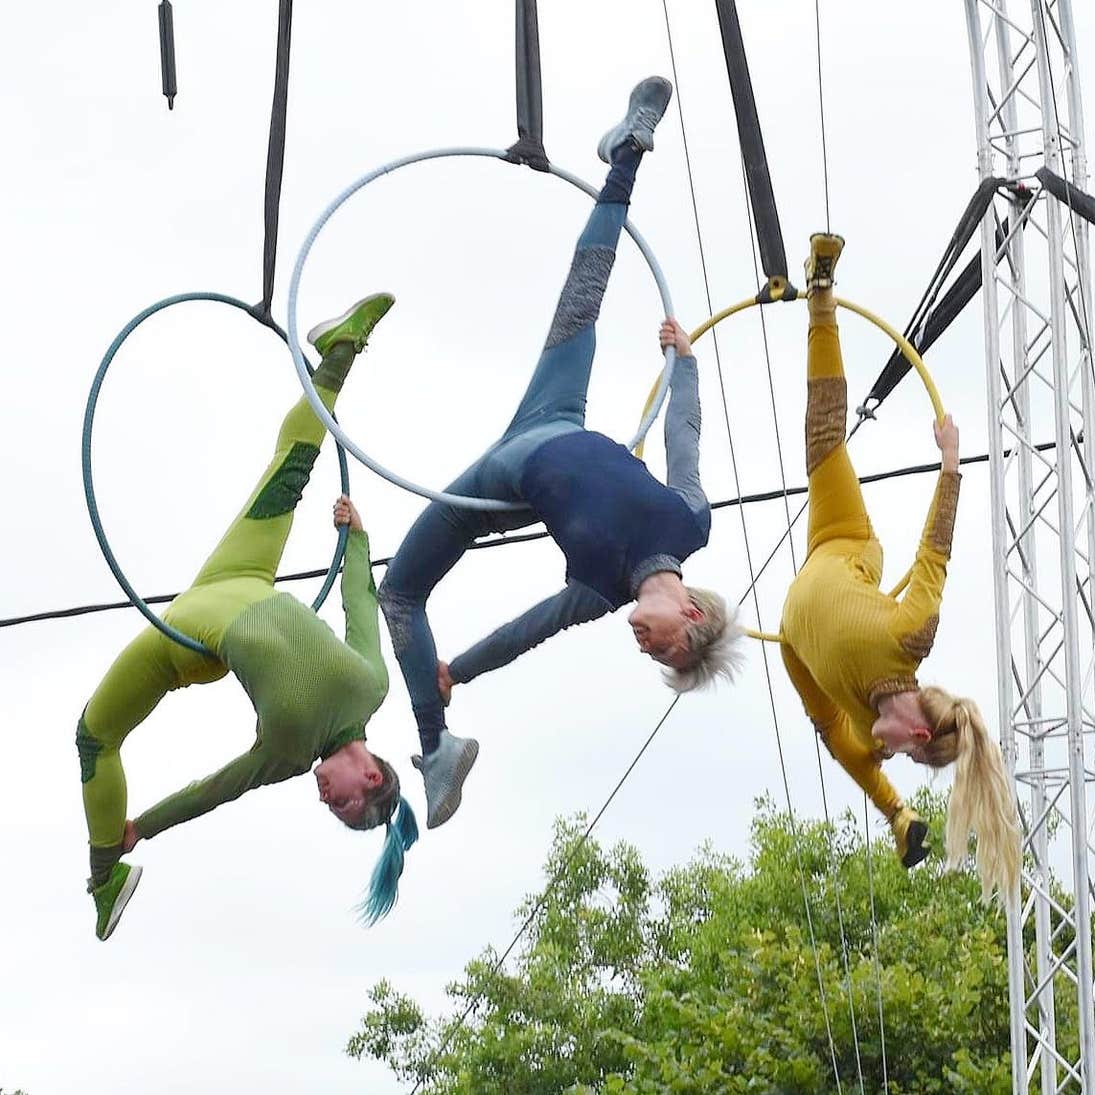 Three aerial performers dangling in rings at the Spraoi International Street Arts Festival in Waterford.